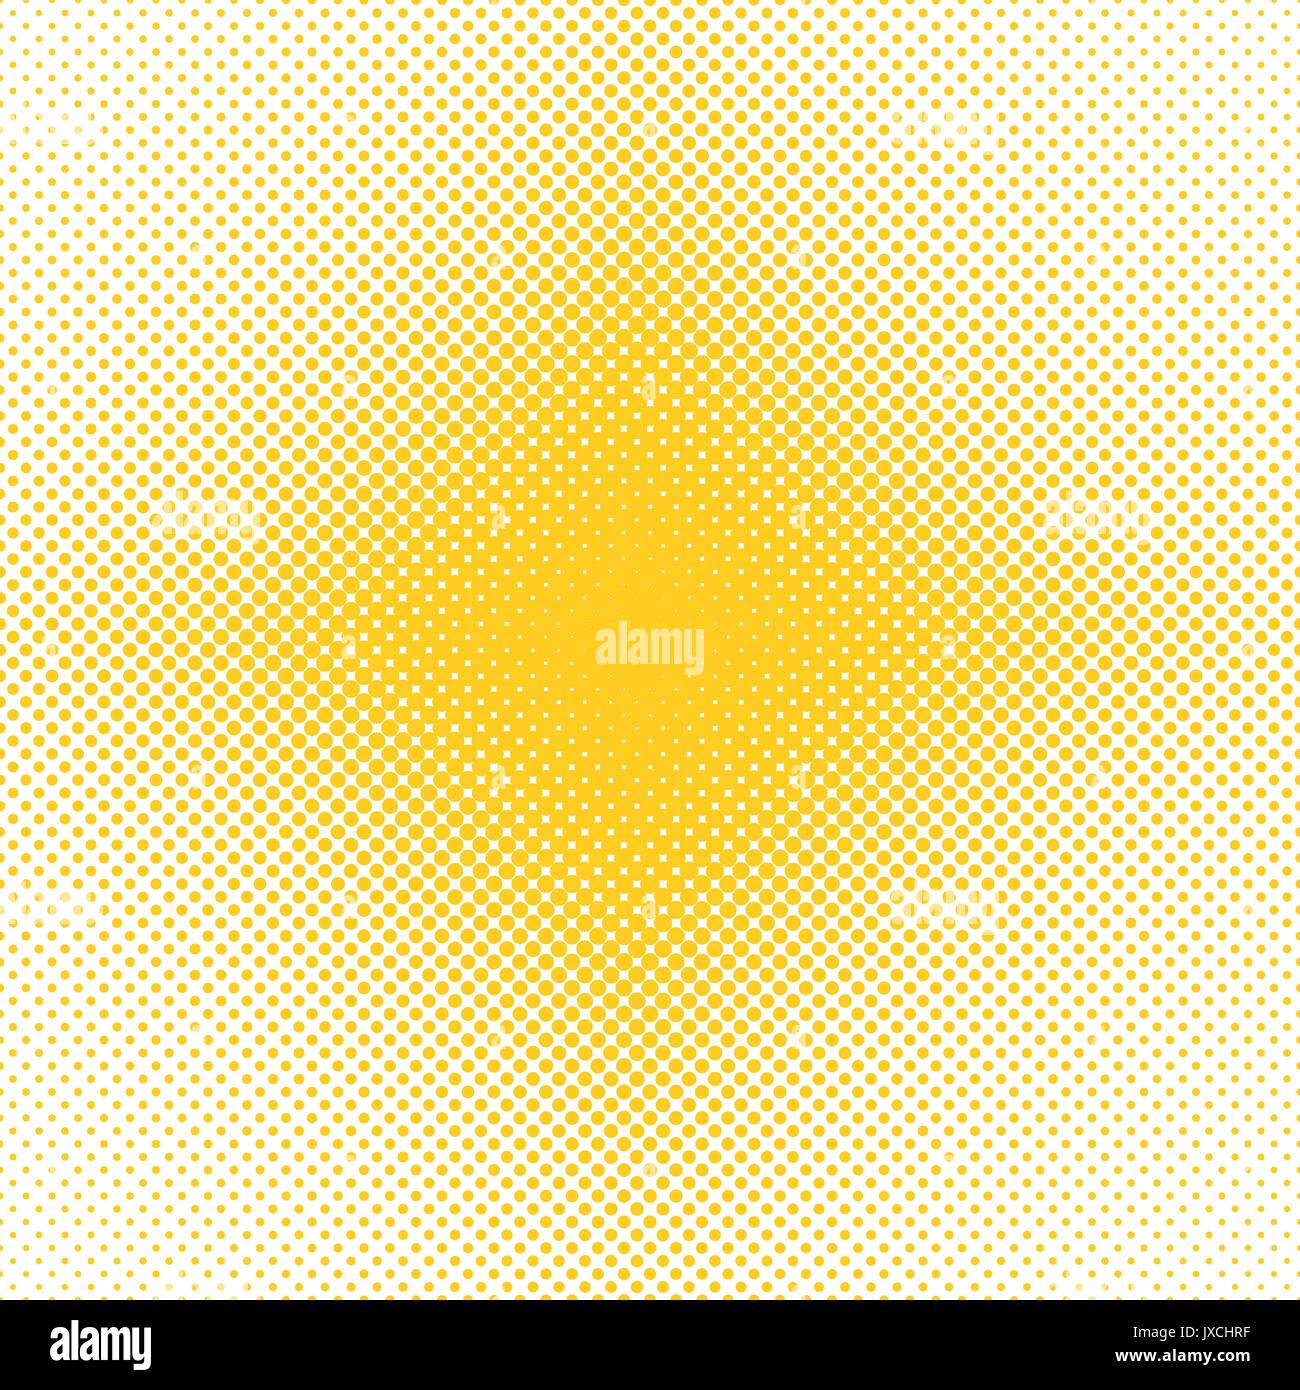 Symmetrical halftone circle pattern background - vector graphic design from dots in varying sizes Stock Vector